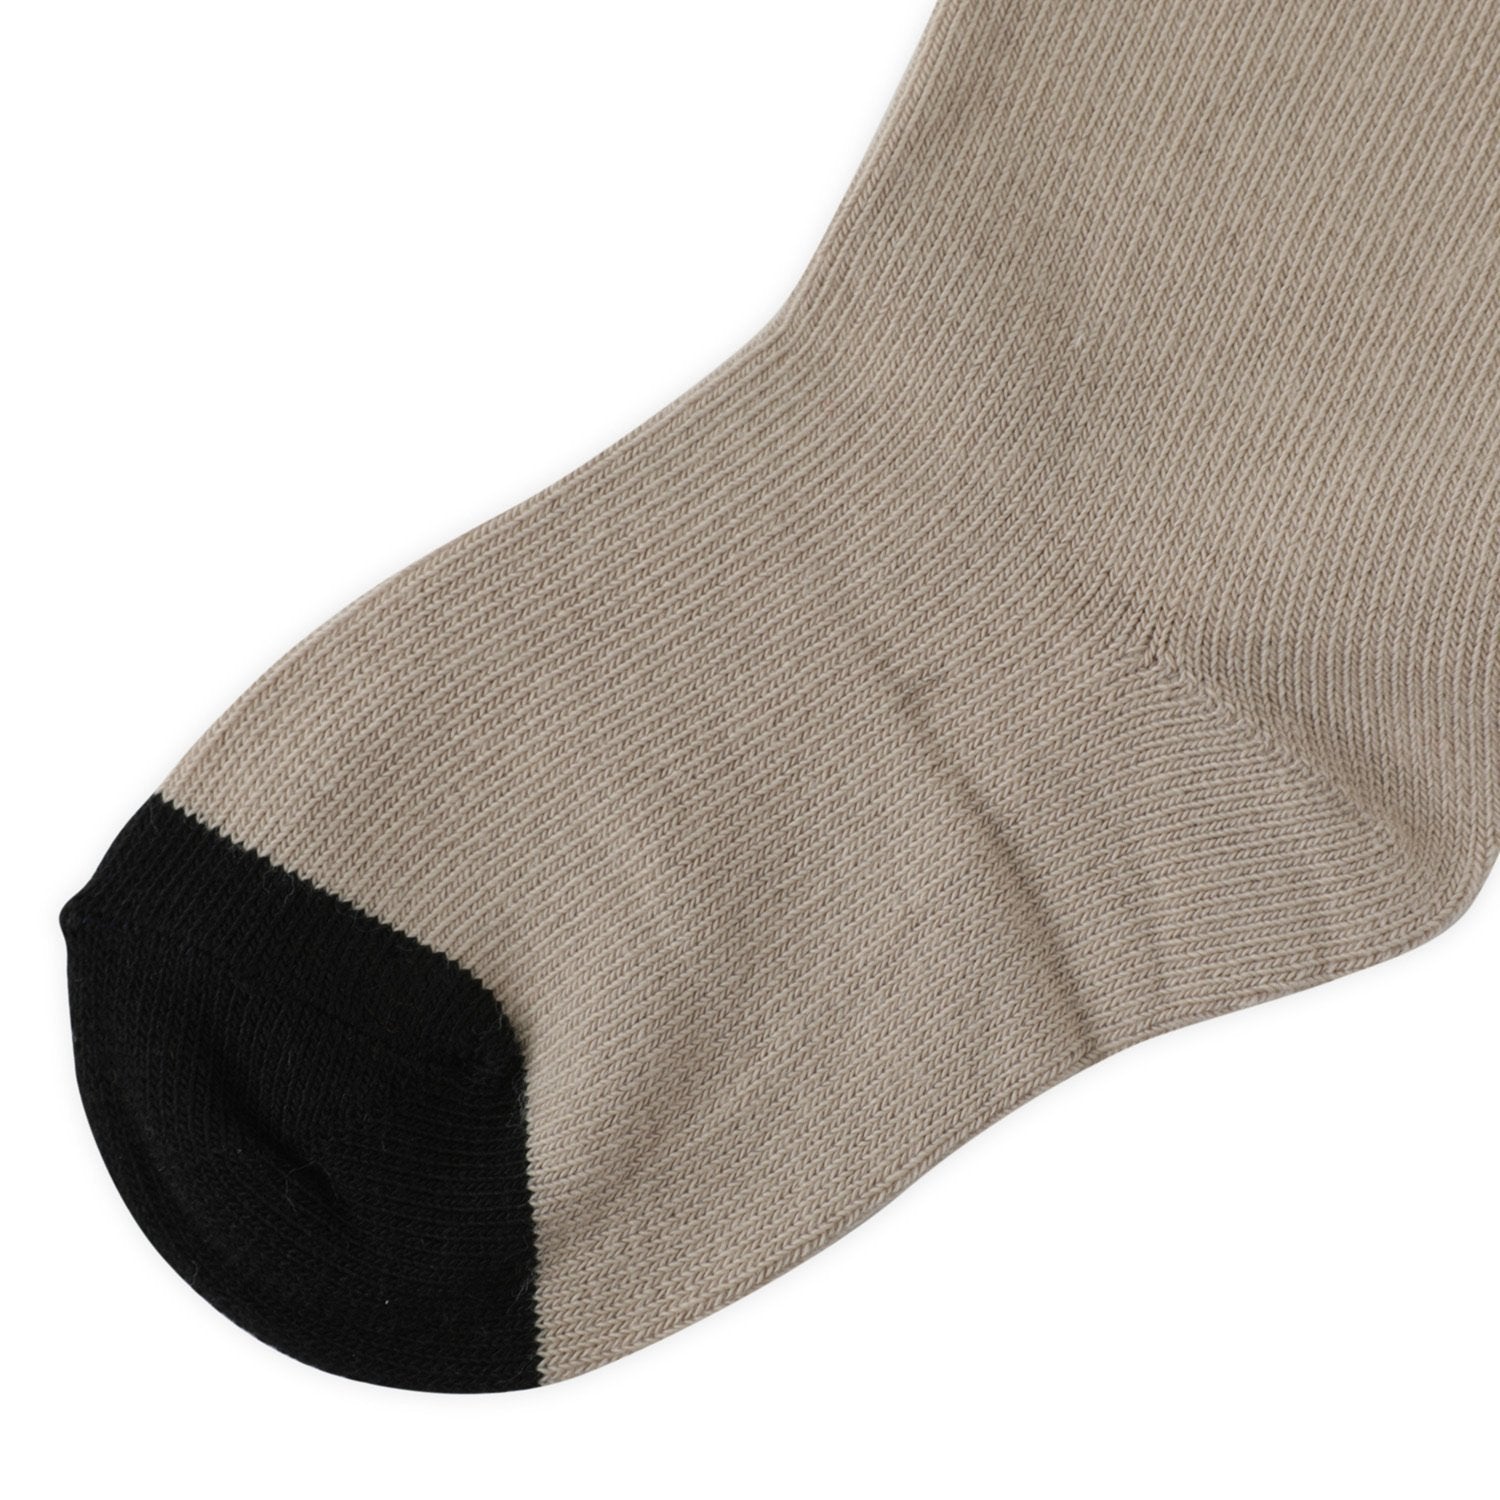 Two Tone Socken find Stylish Fashion for Little People- at Little Foxx Concept Store